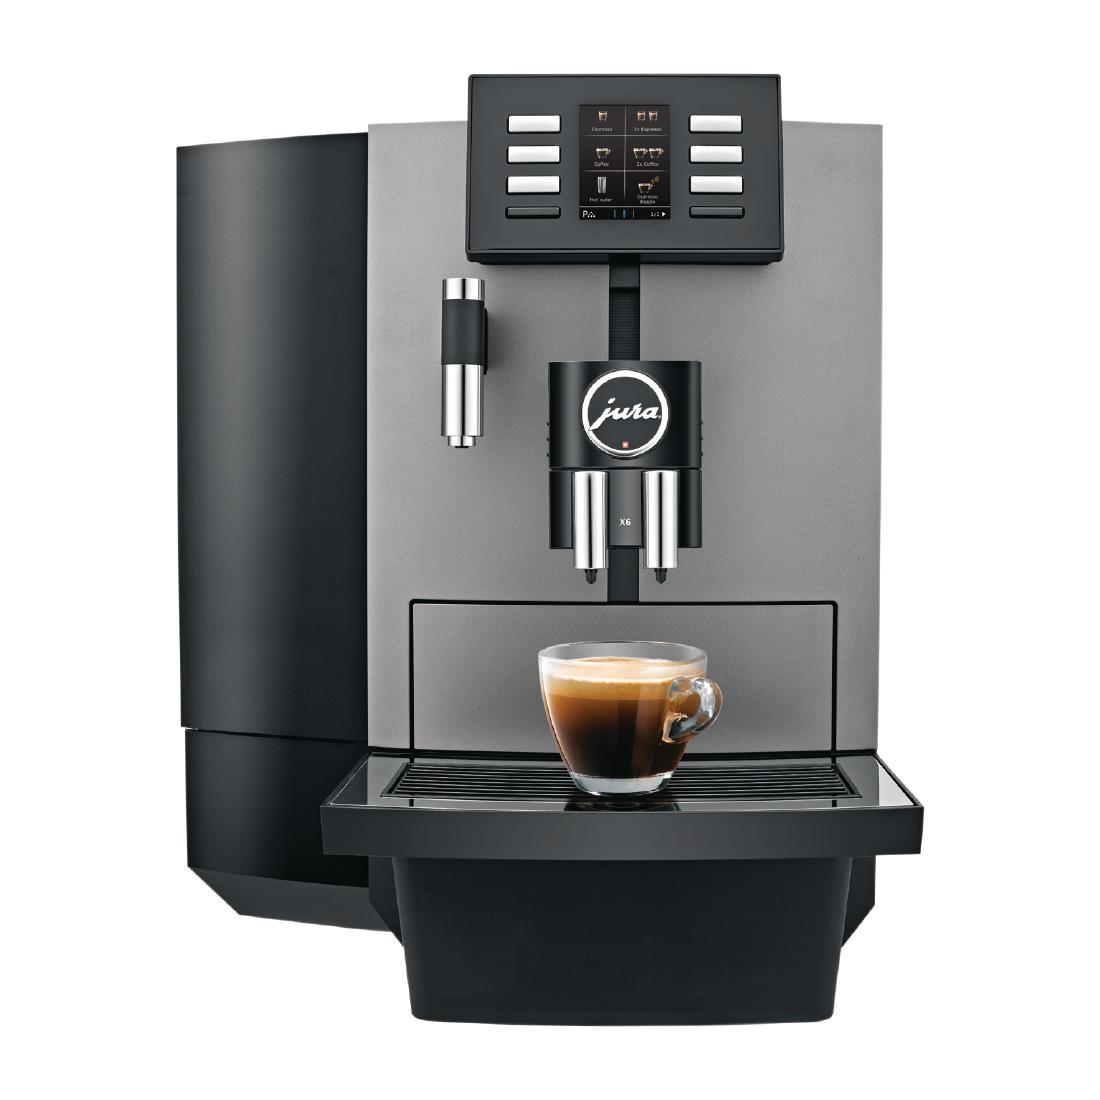 Jura JX6 Manual Fill Bean to Cup Coffee Machine 15191 with Filter/Installation/Training - DT420-M  - 2